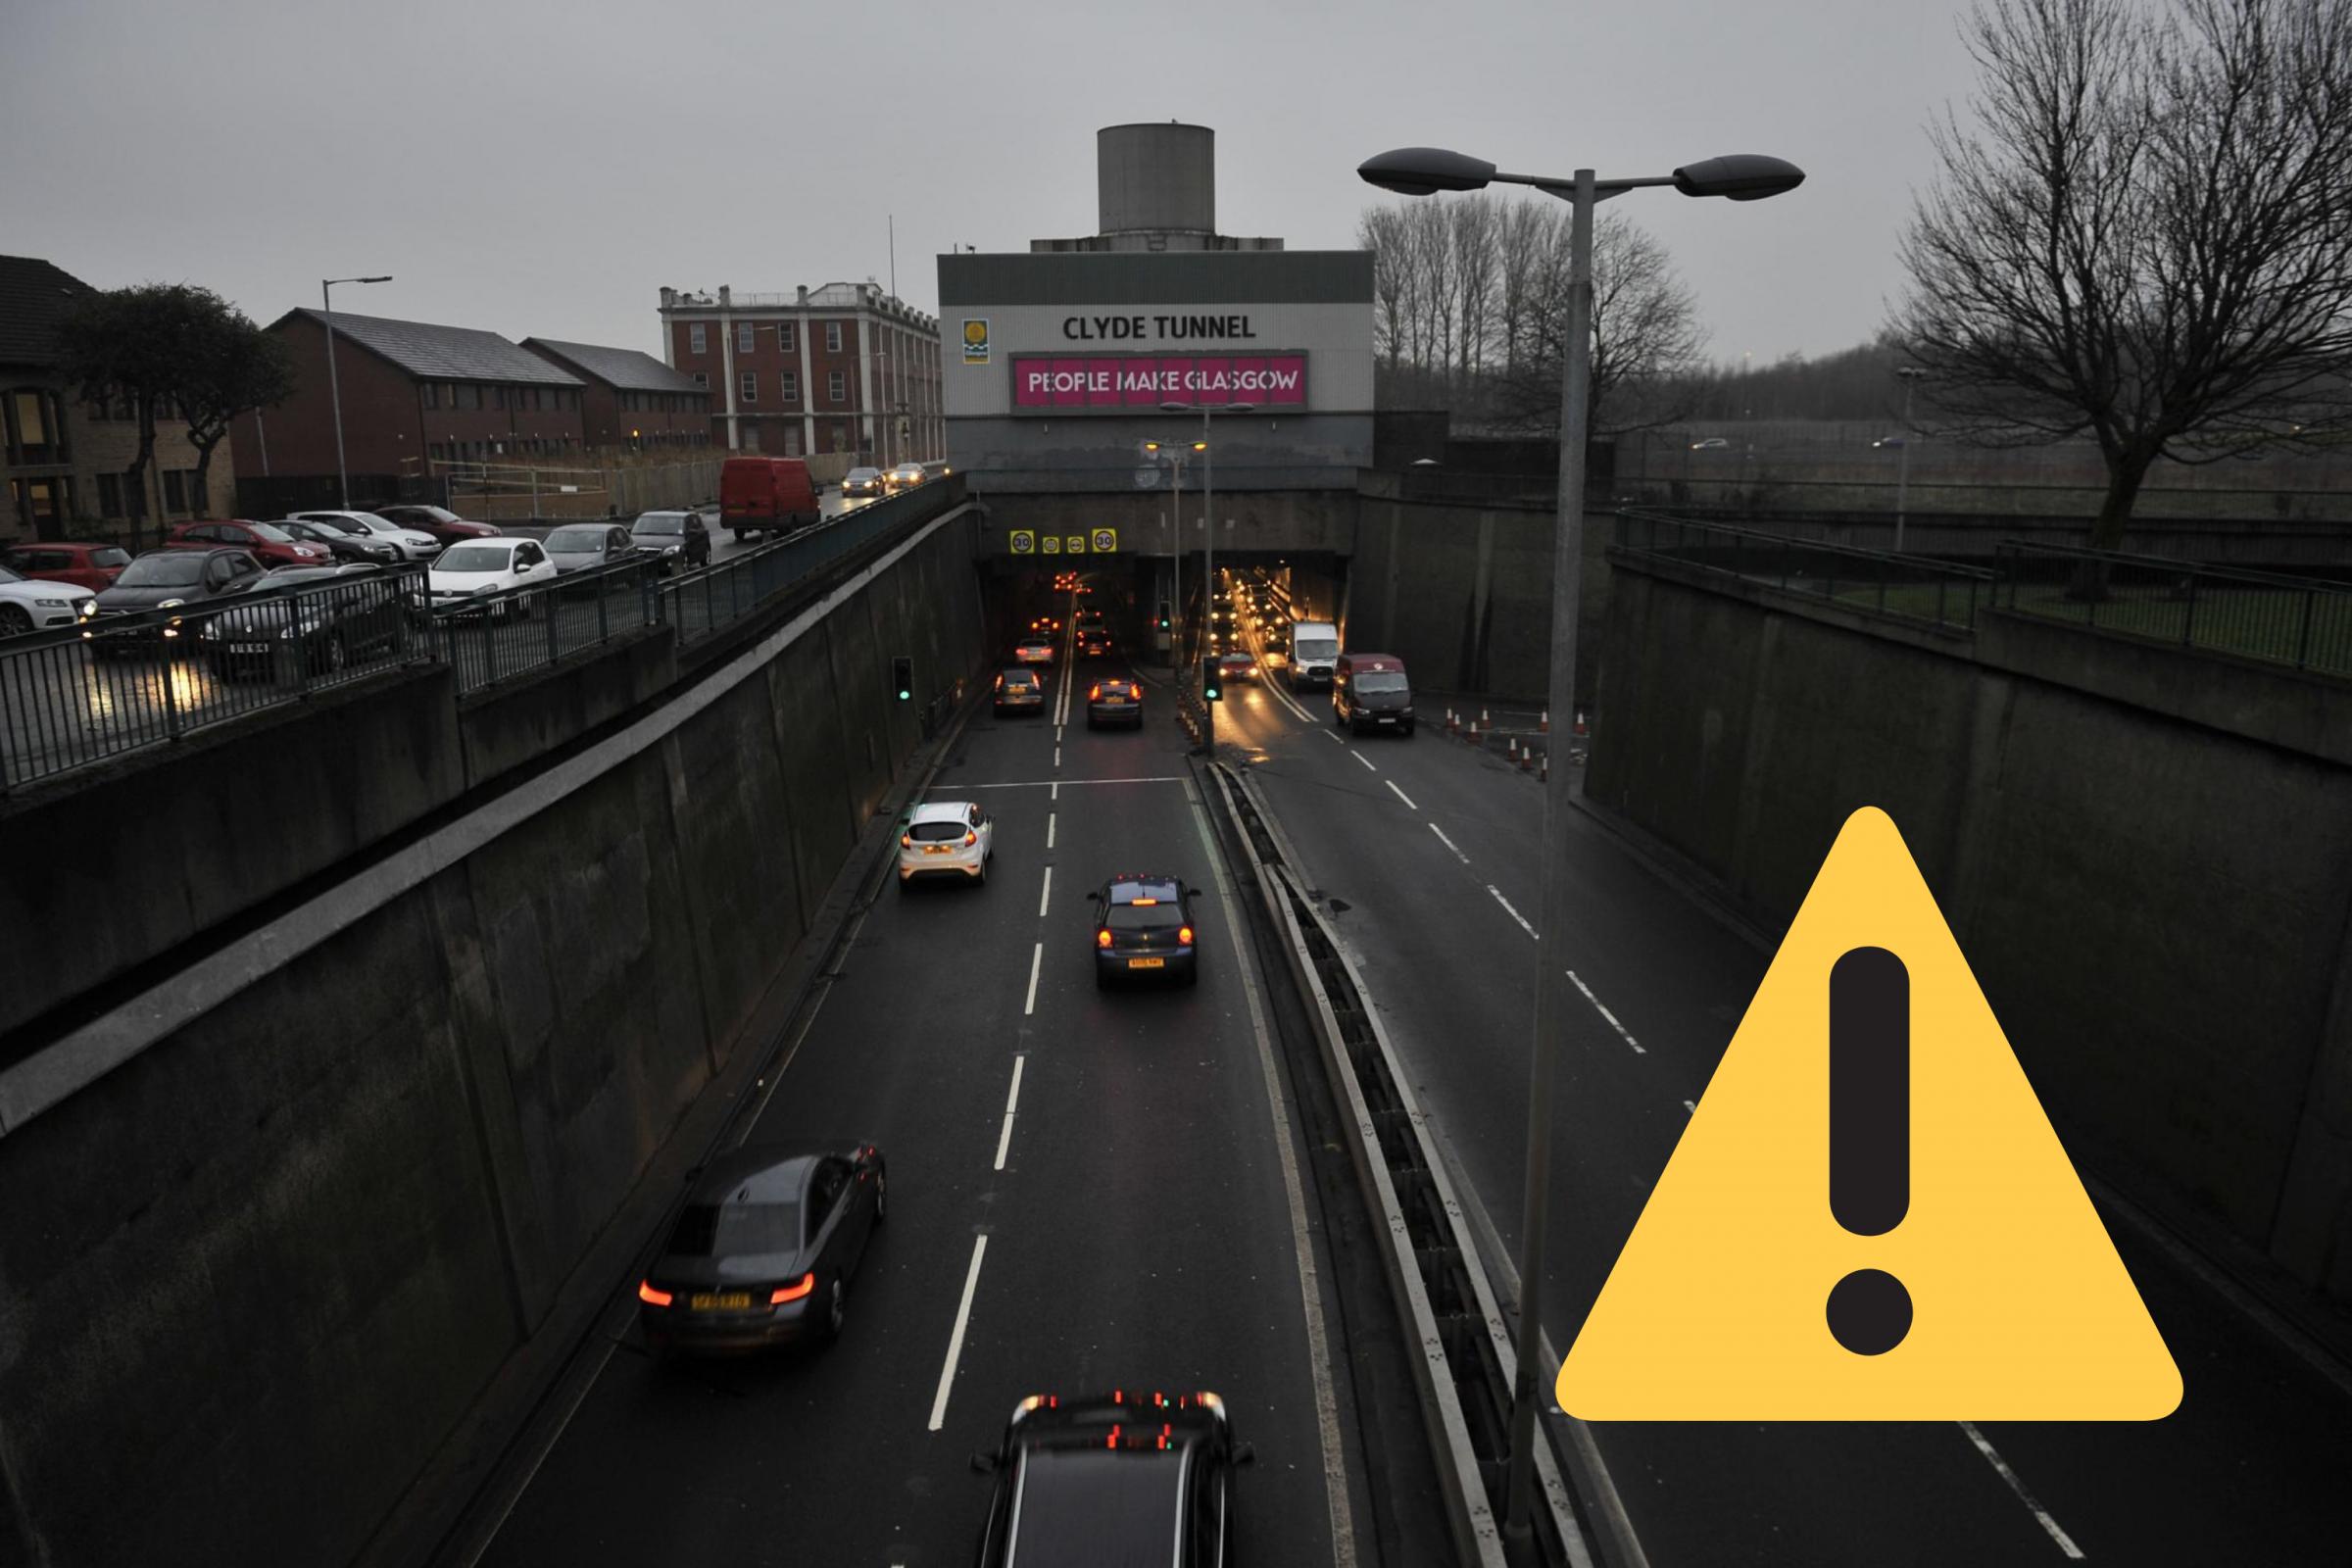 Glagow's Clyde Tunnel reduced to one lane following two vehicle crash